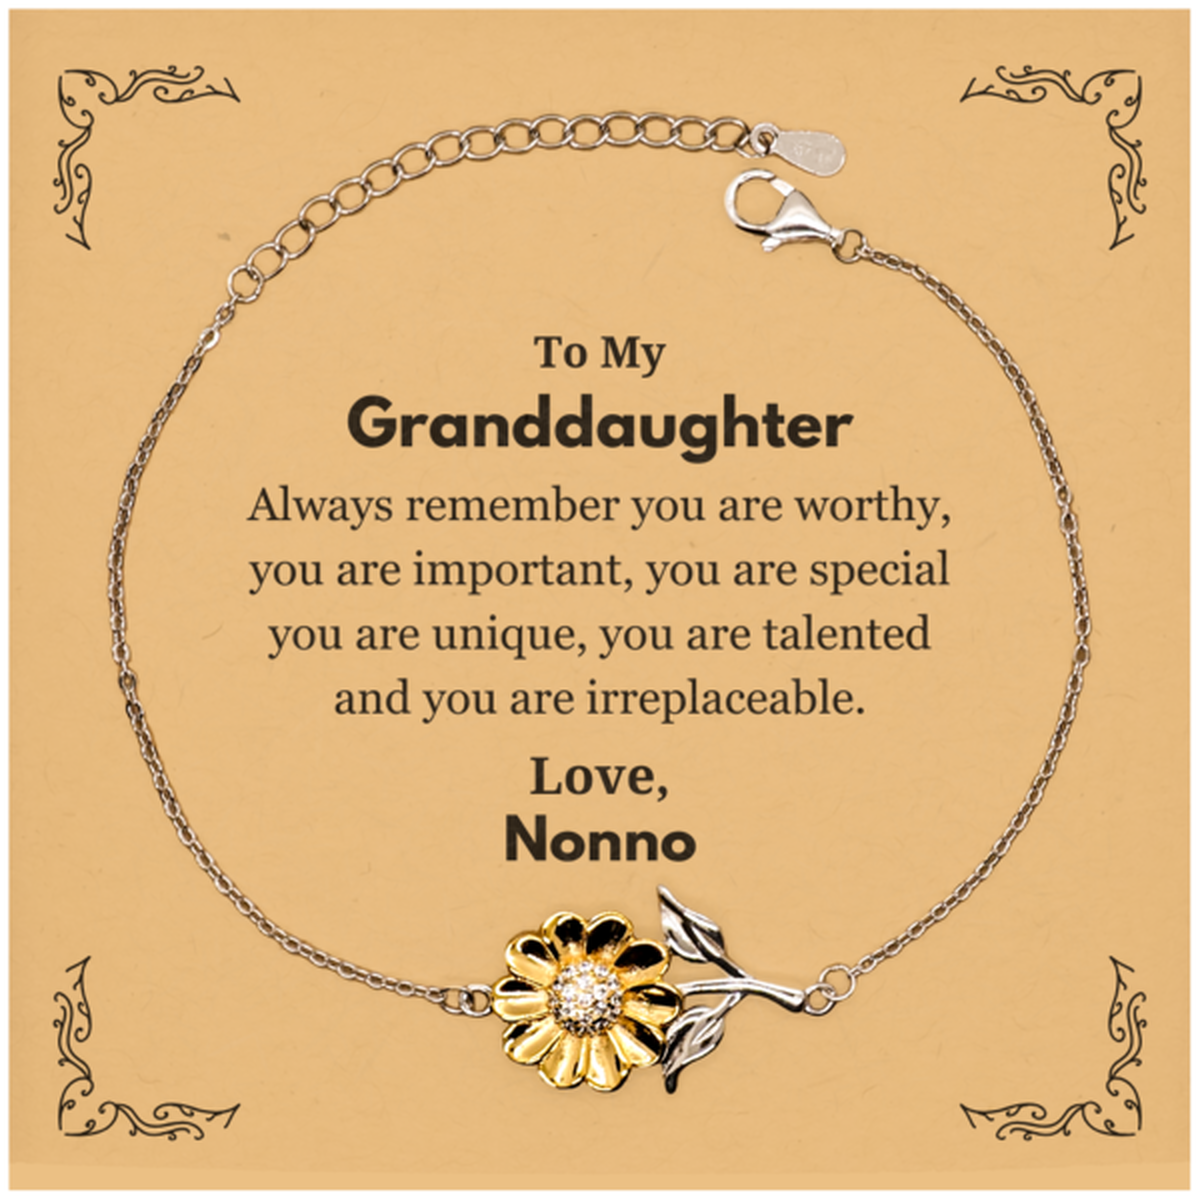 Granddaughter Birthday Gifts from Nonno, Inspirational Sunflower Bracelet for Granddaughter Christmas Graduation Gifts for Granddaughter Always remember you are worthy, you are important. Love, Nonno